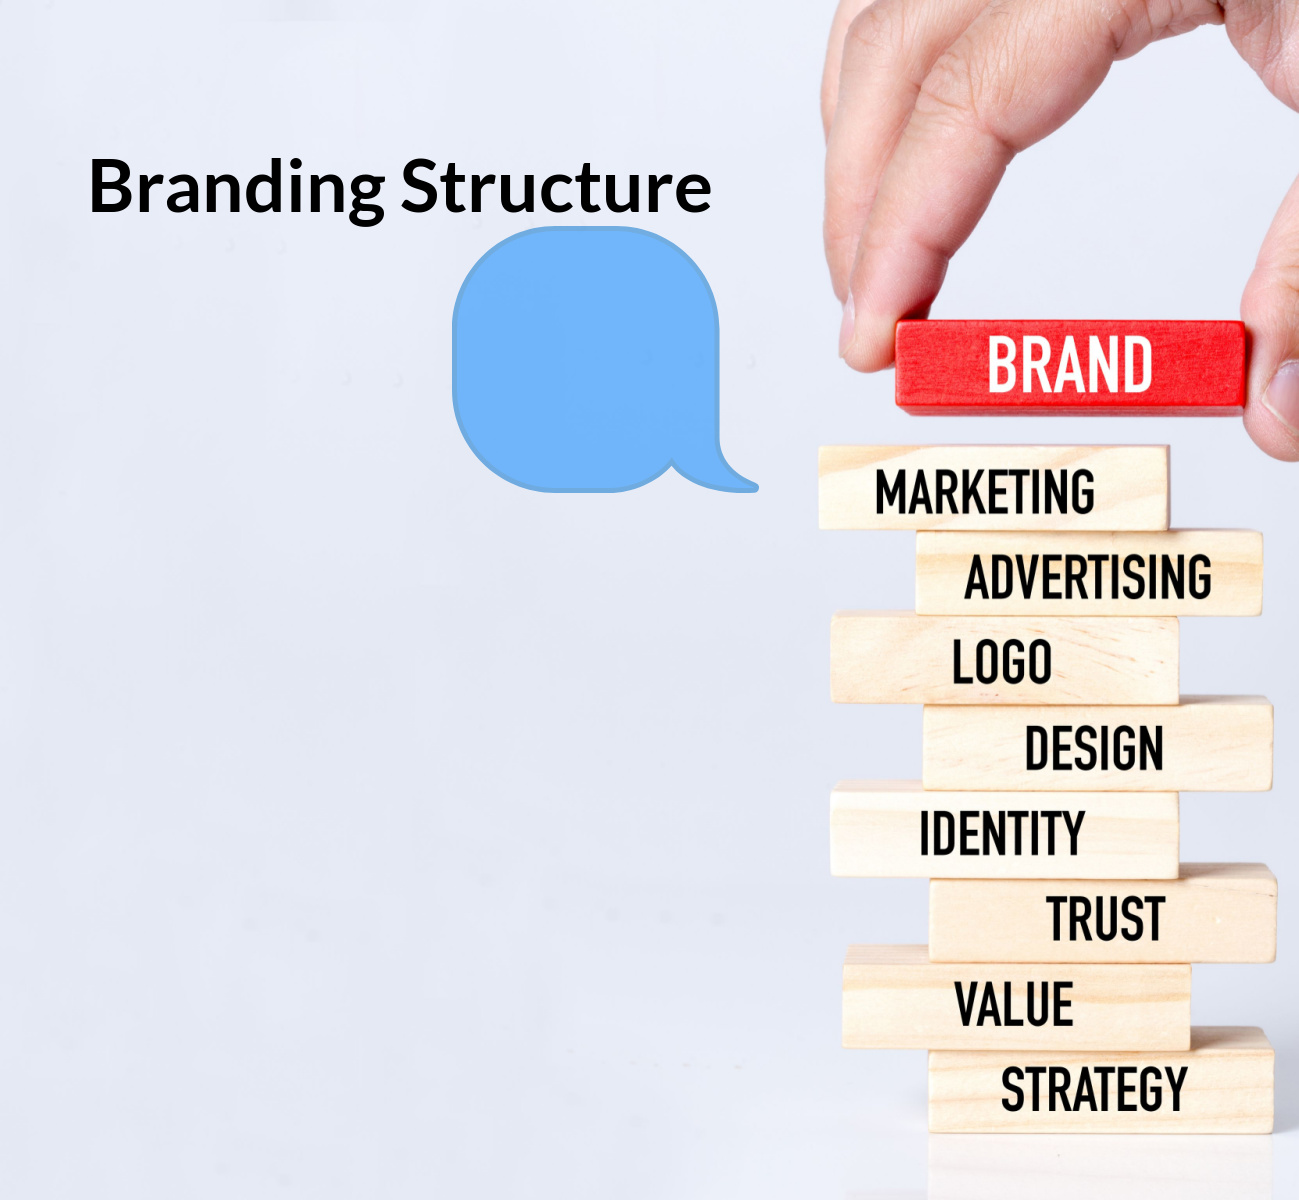 What is The Branding Structure?